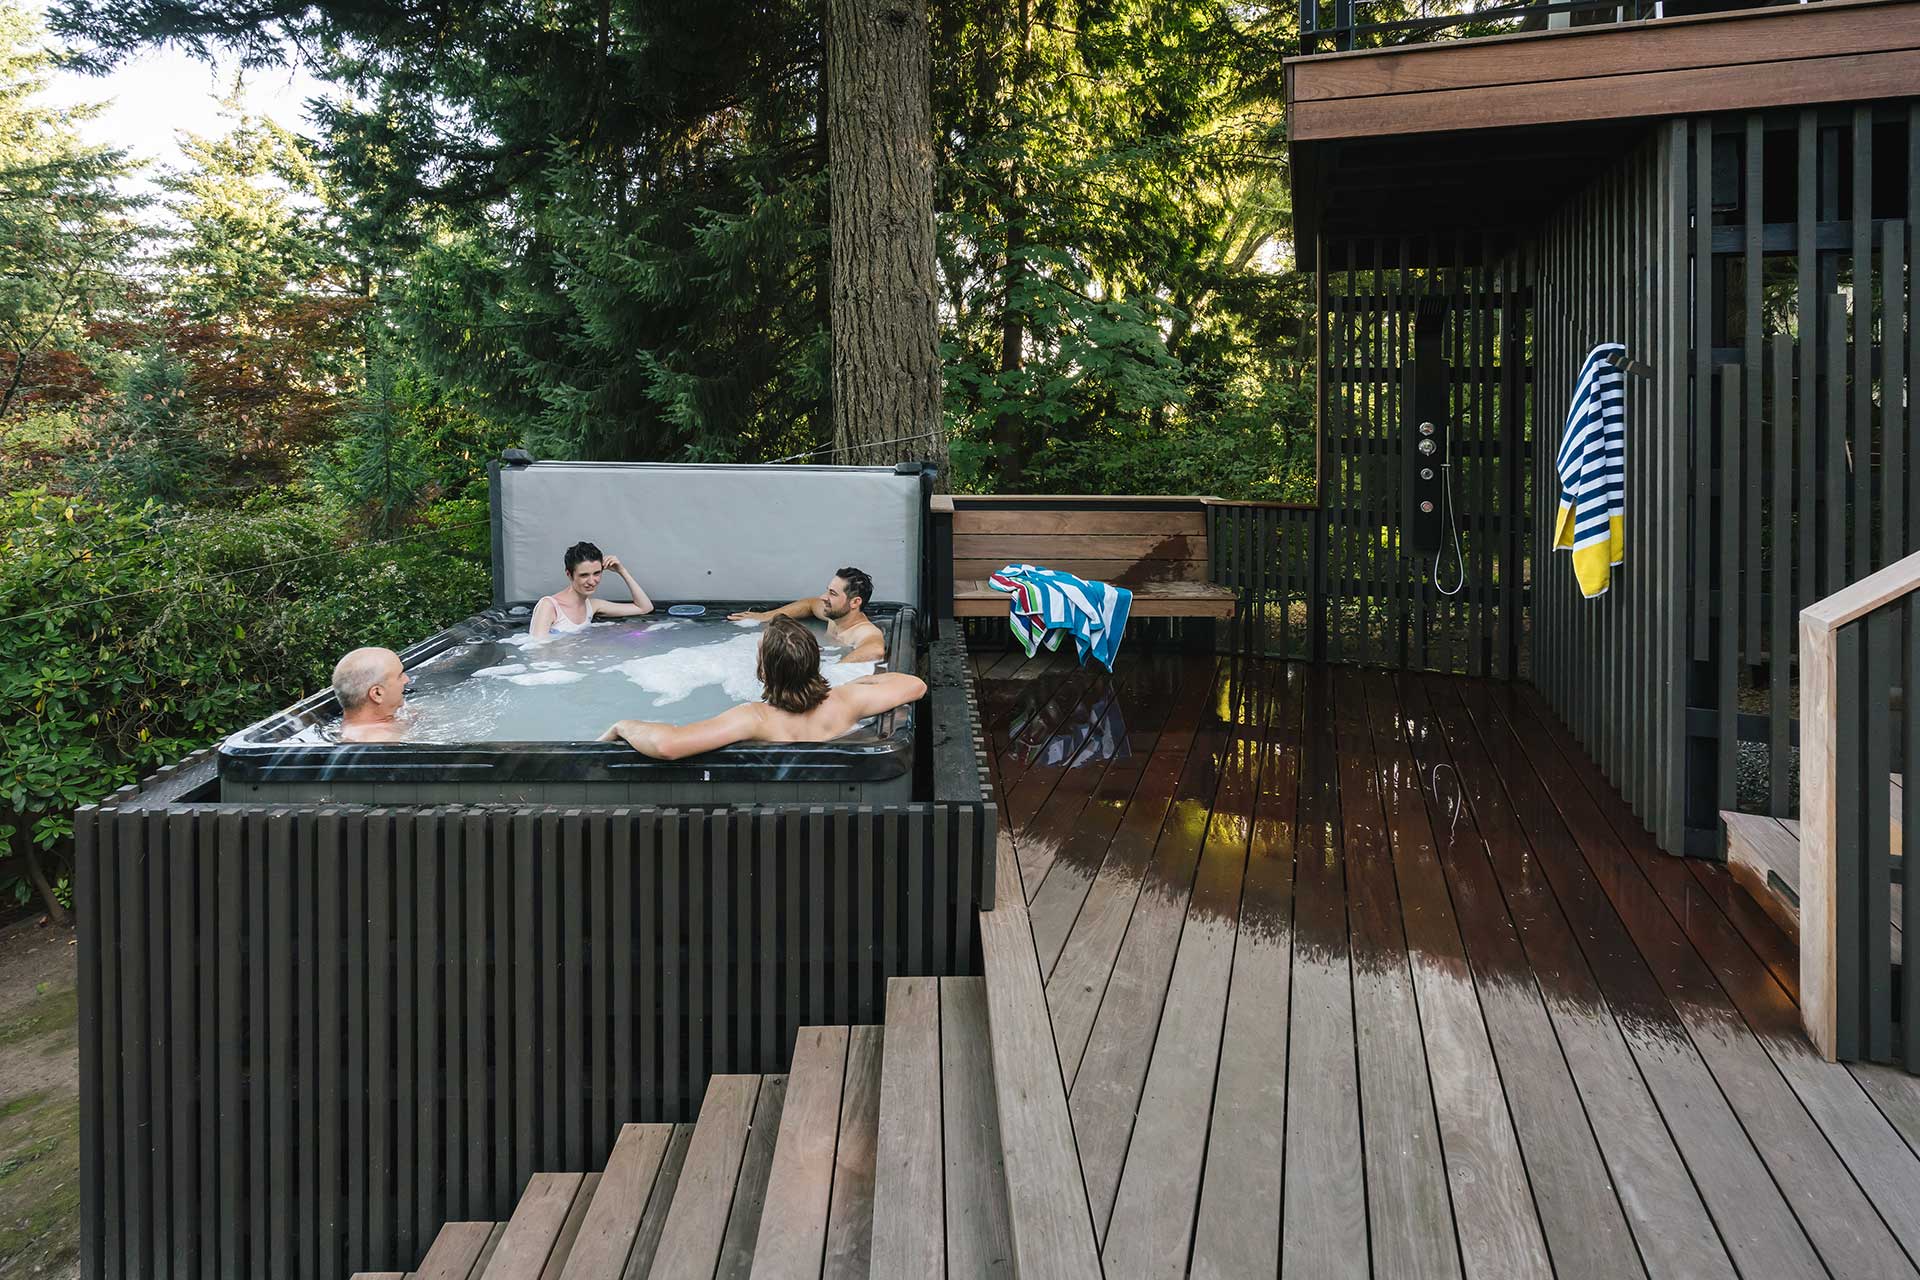 The Hillsdale Deck features a hot tub and an outdoor shower.